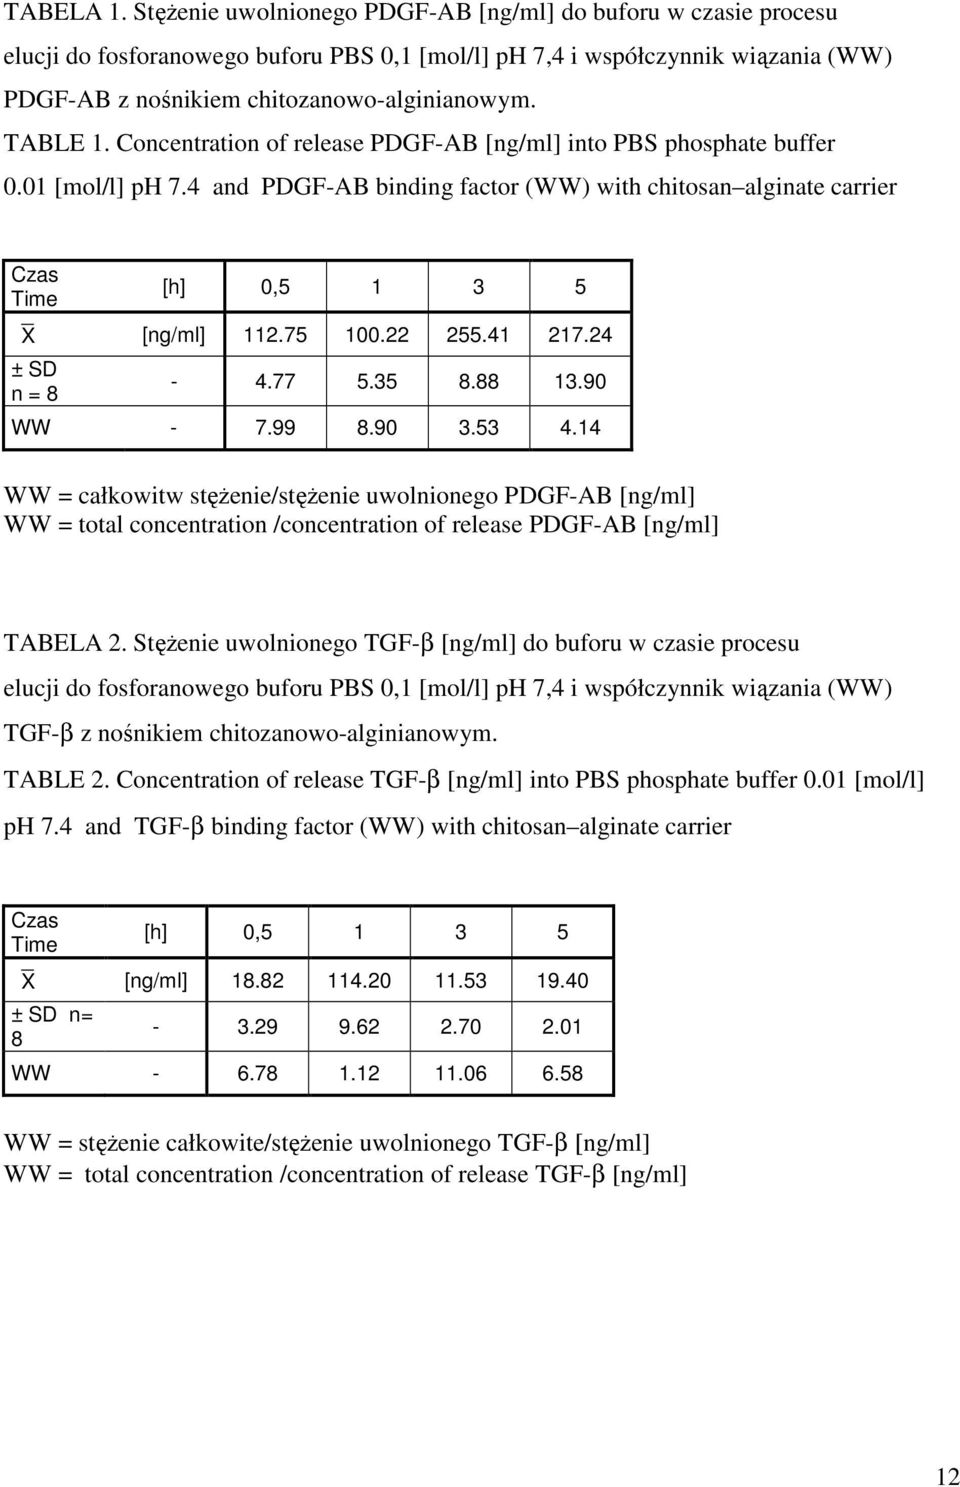 TABLE 1. Concentration of release PDGF-AB [ng/ml] into PBS phosphate buffer 0.01 [mol/l] ph 7.4 and PDGF-AB binding factor (WW) with chitosan alginate carrier Czas Time [h] 0,5 1 3 5 X [ng/ml] 112.